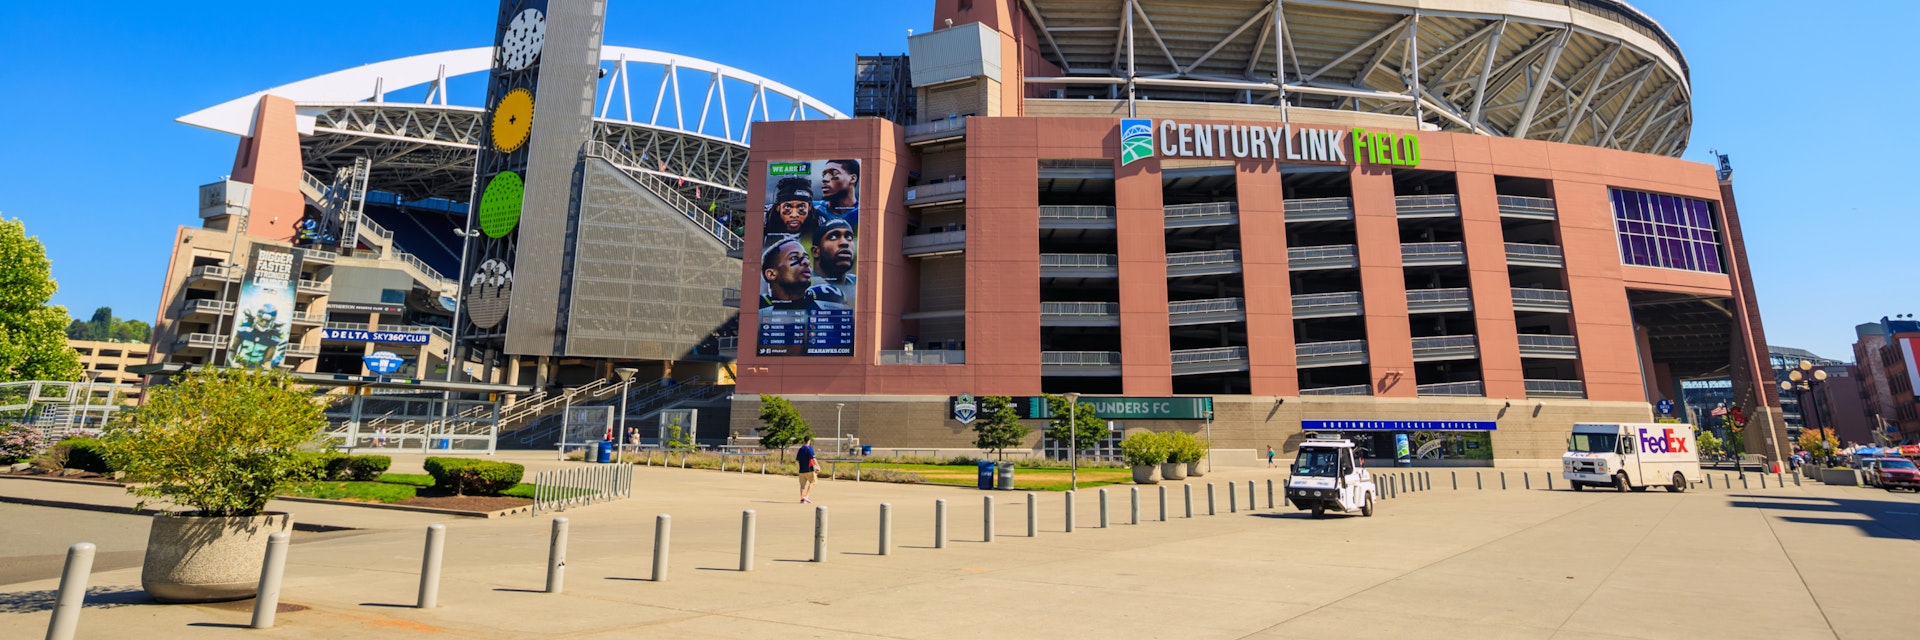 SEATTLE - JULY 5: CenturyLink Field, Seattle in July 5, 2012. It was originally called Seahawks Stadium but was renamed Qwest Field on June 23, 2004; Shutterstock ID 205880179; Your name (First / Last): Alexander Howard; GL account no.: 65050; Netsuite department name: Online Editorial; Full Product or Project name including edition: Western USA neighborhood POI highlights